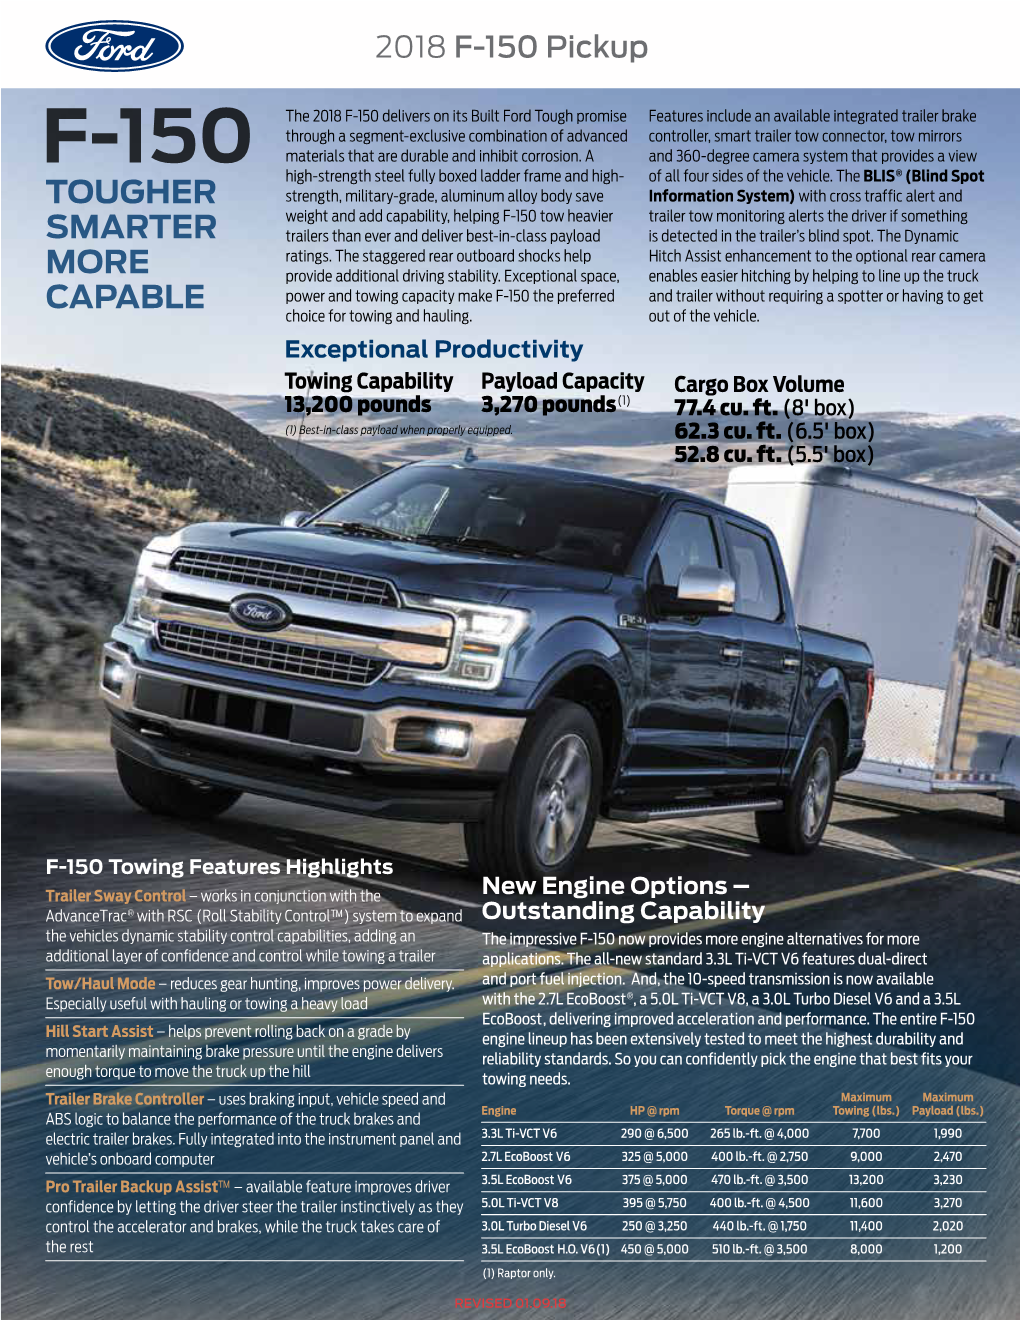 2018 RV & Trailer Towing Guide — F-150 and Raptor